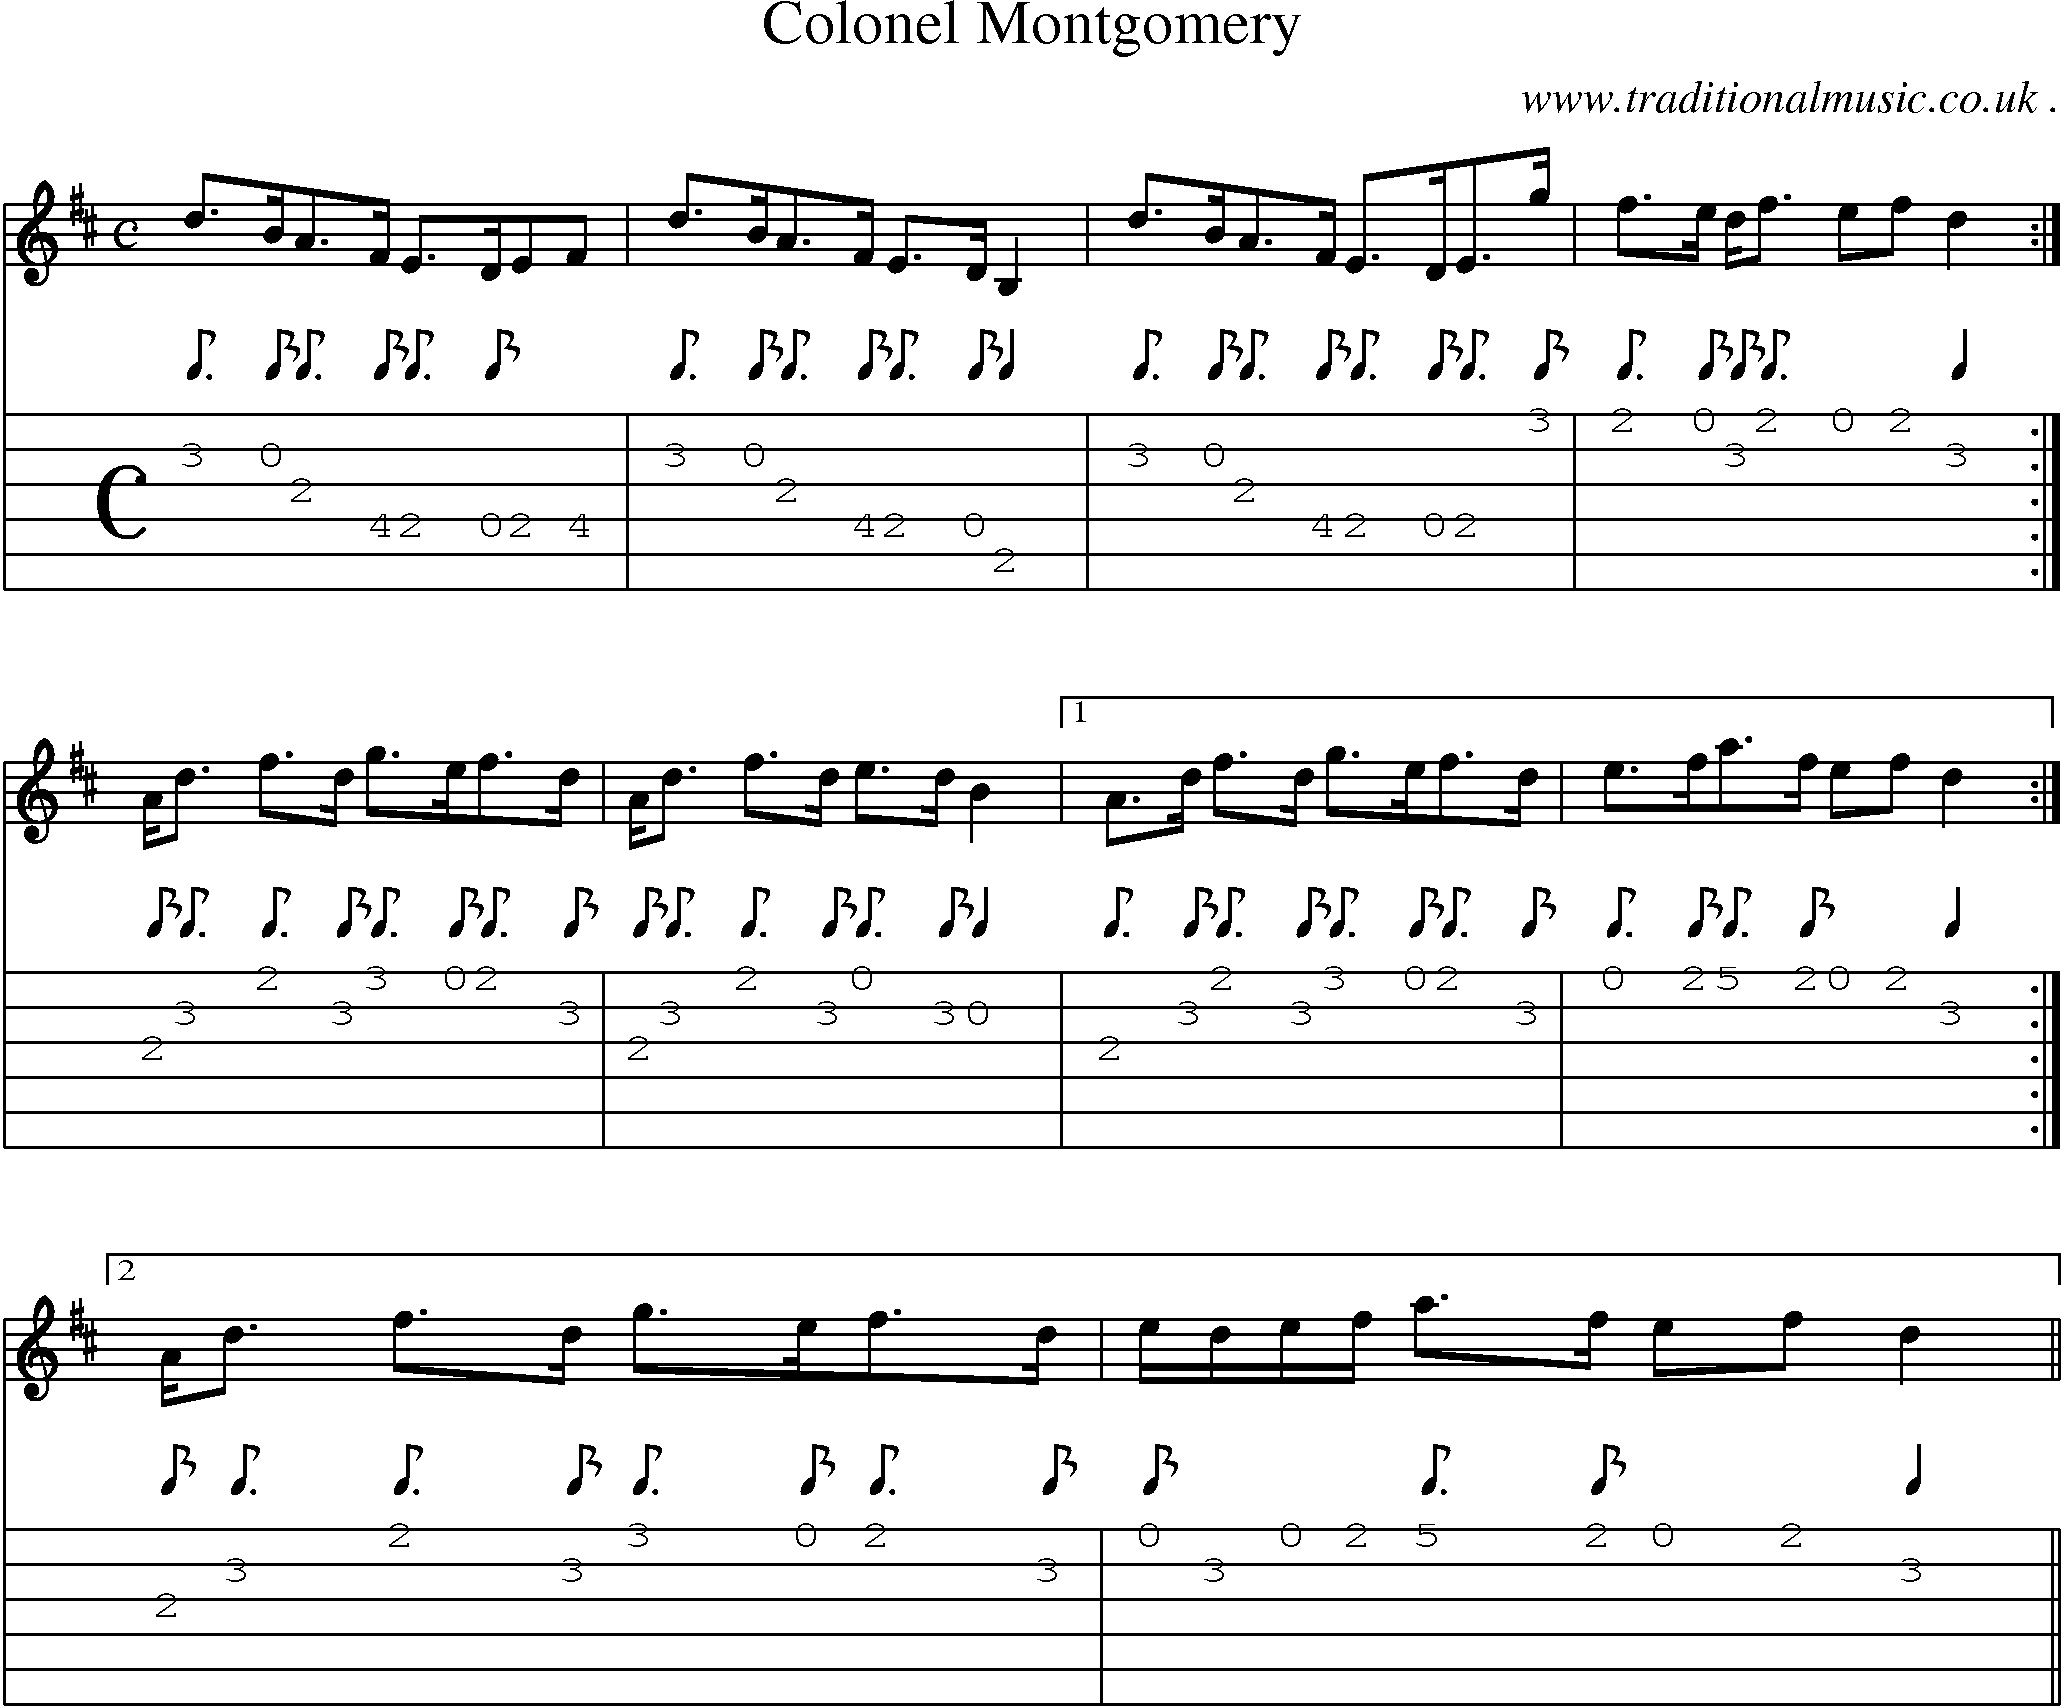 Sheet-music  score, Chords and Guitar Tabs for Colonel Montgomery